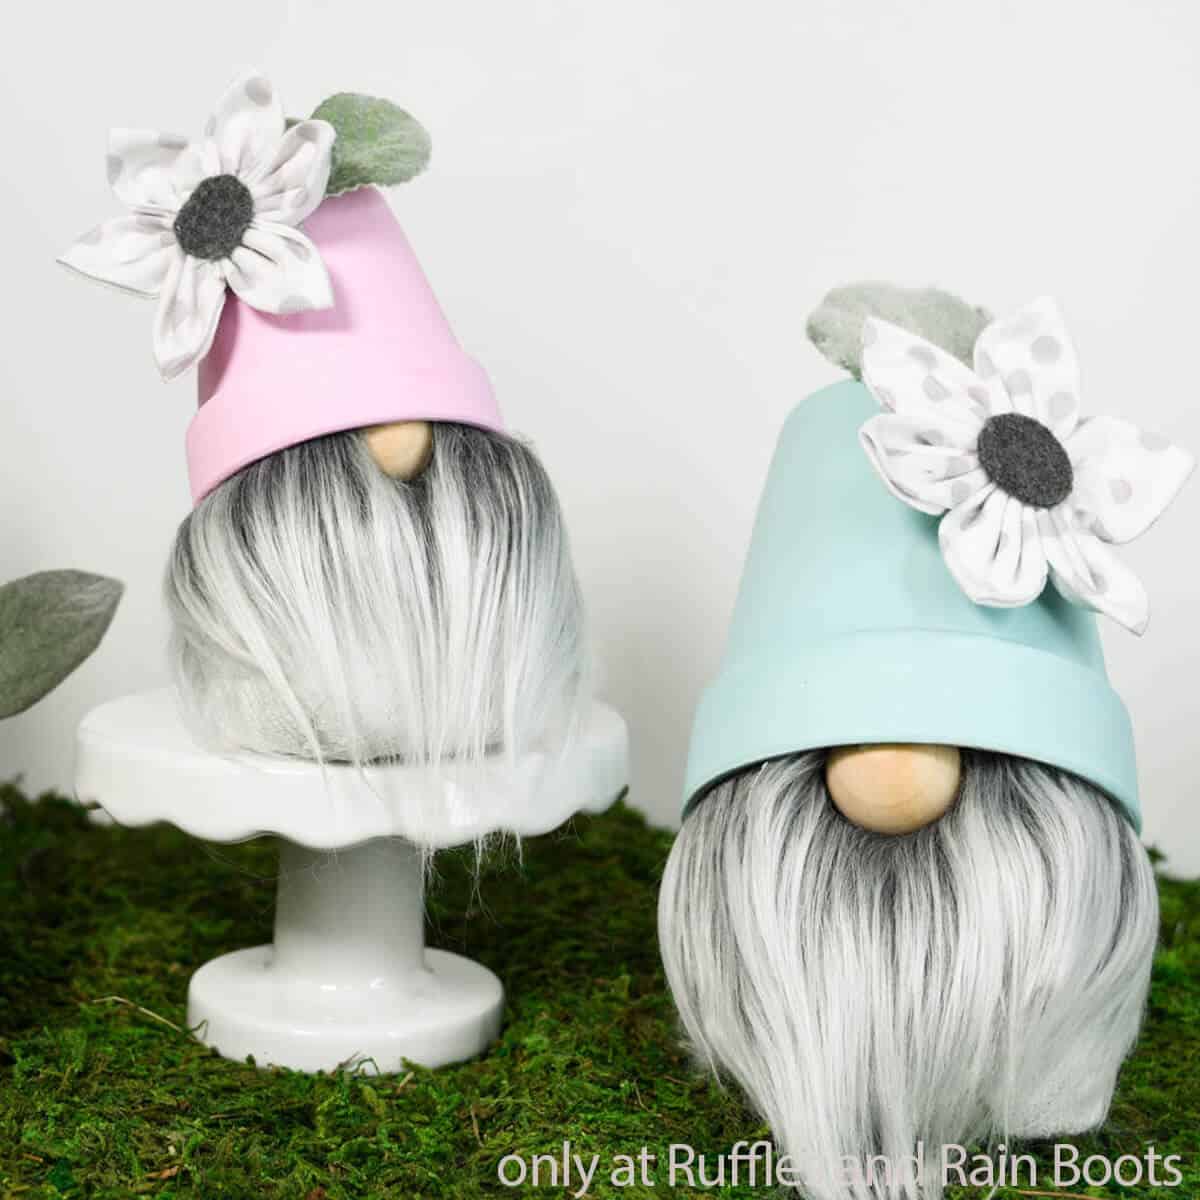 Two DIY Spring gnomes with a flower pot hat, fabric flower, and faux greenery on a bed of moss.